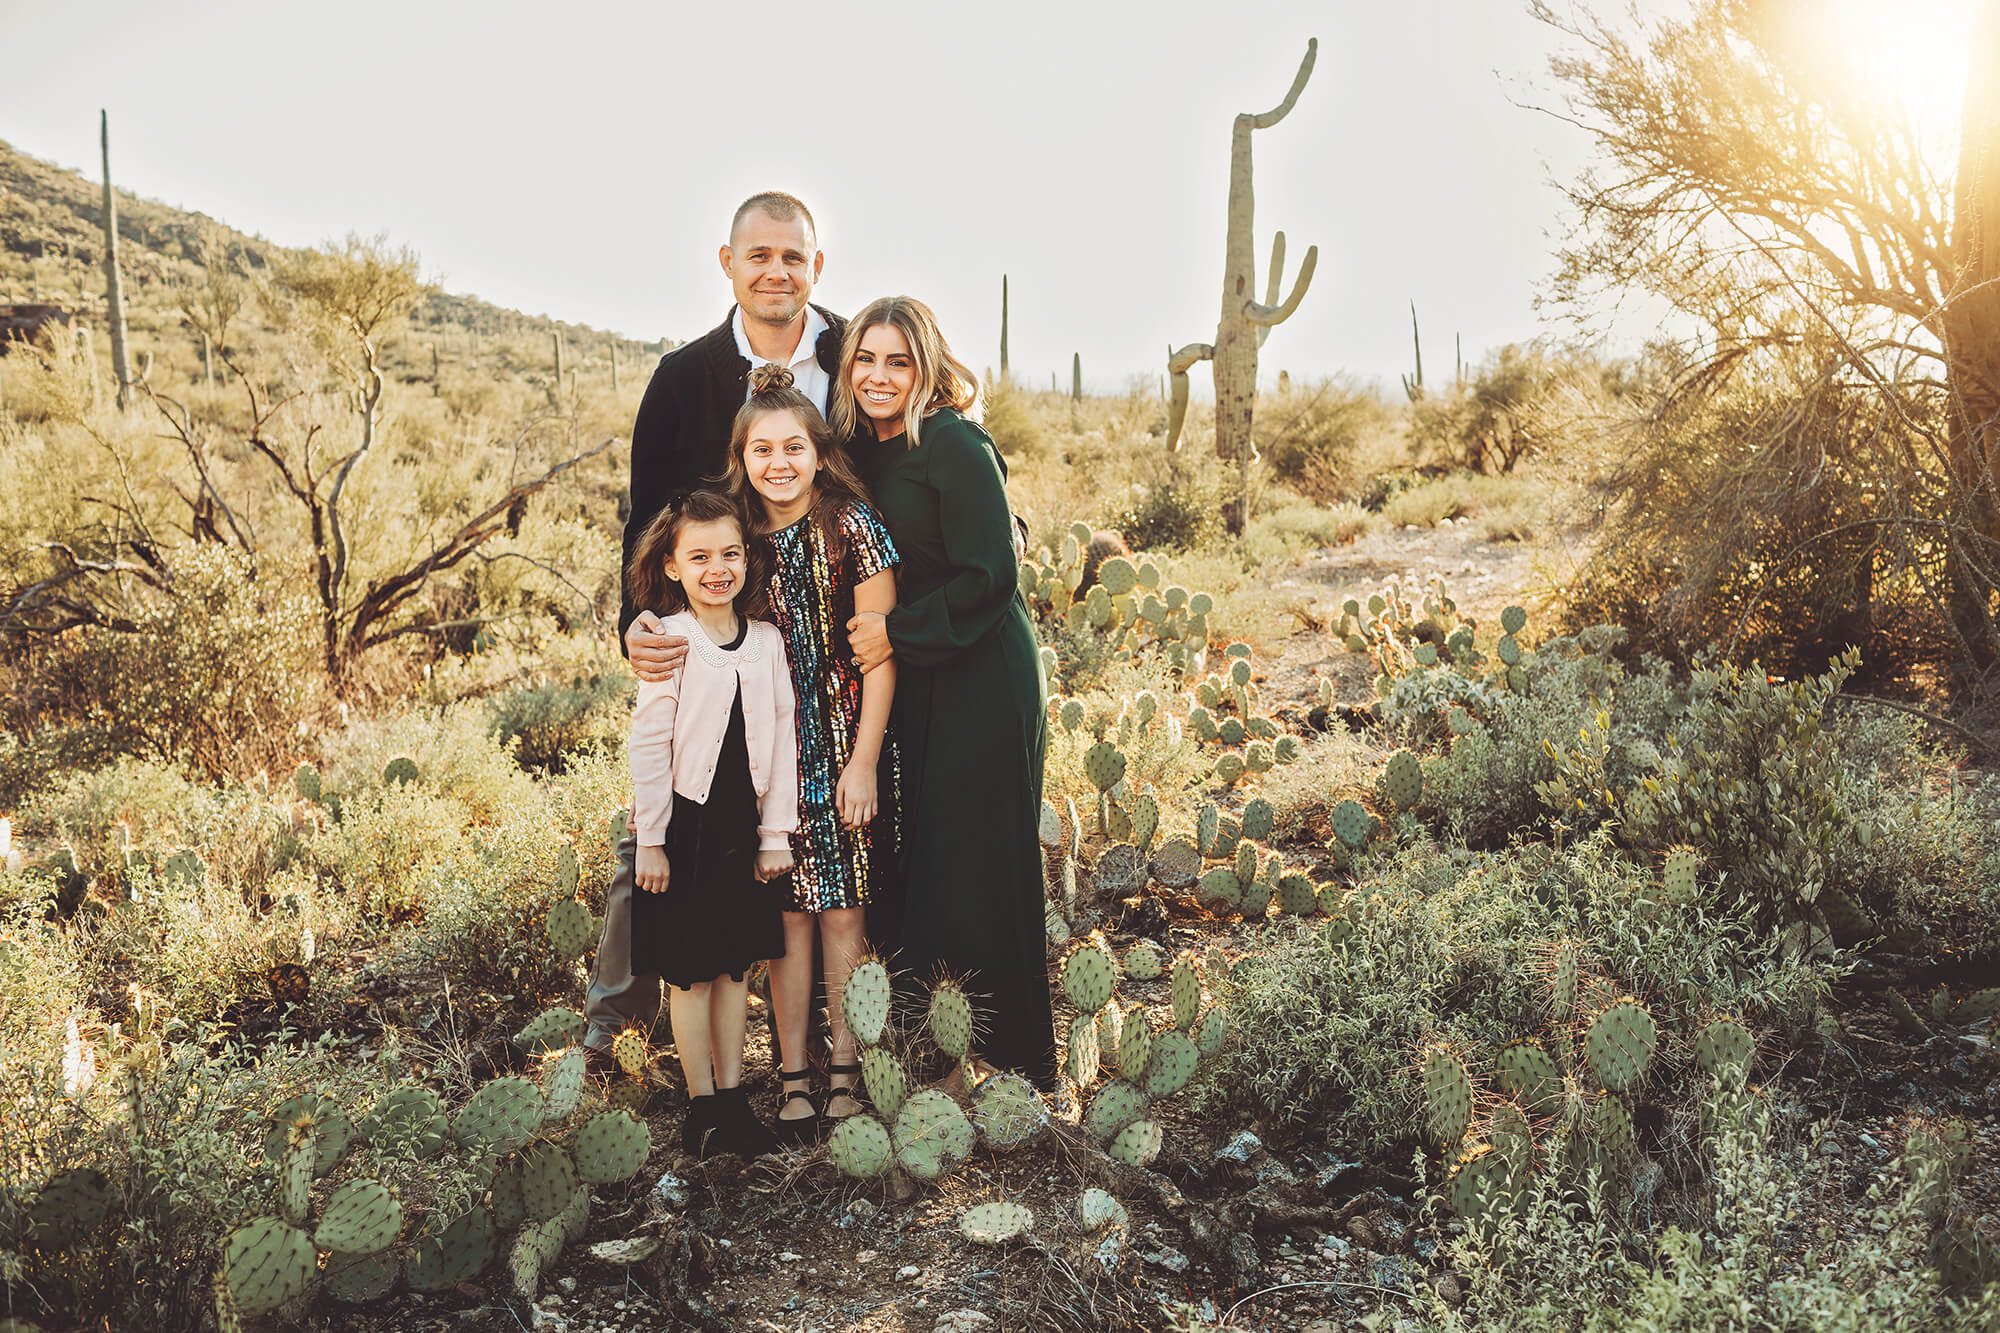 The Gunter family cuddling together in the cool winter Tucson air during their desert family photo session